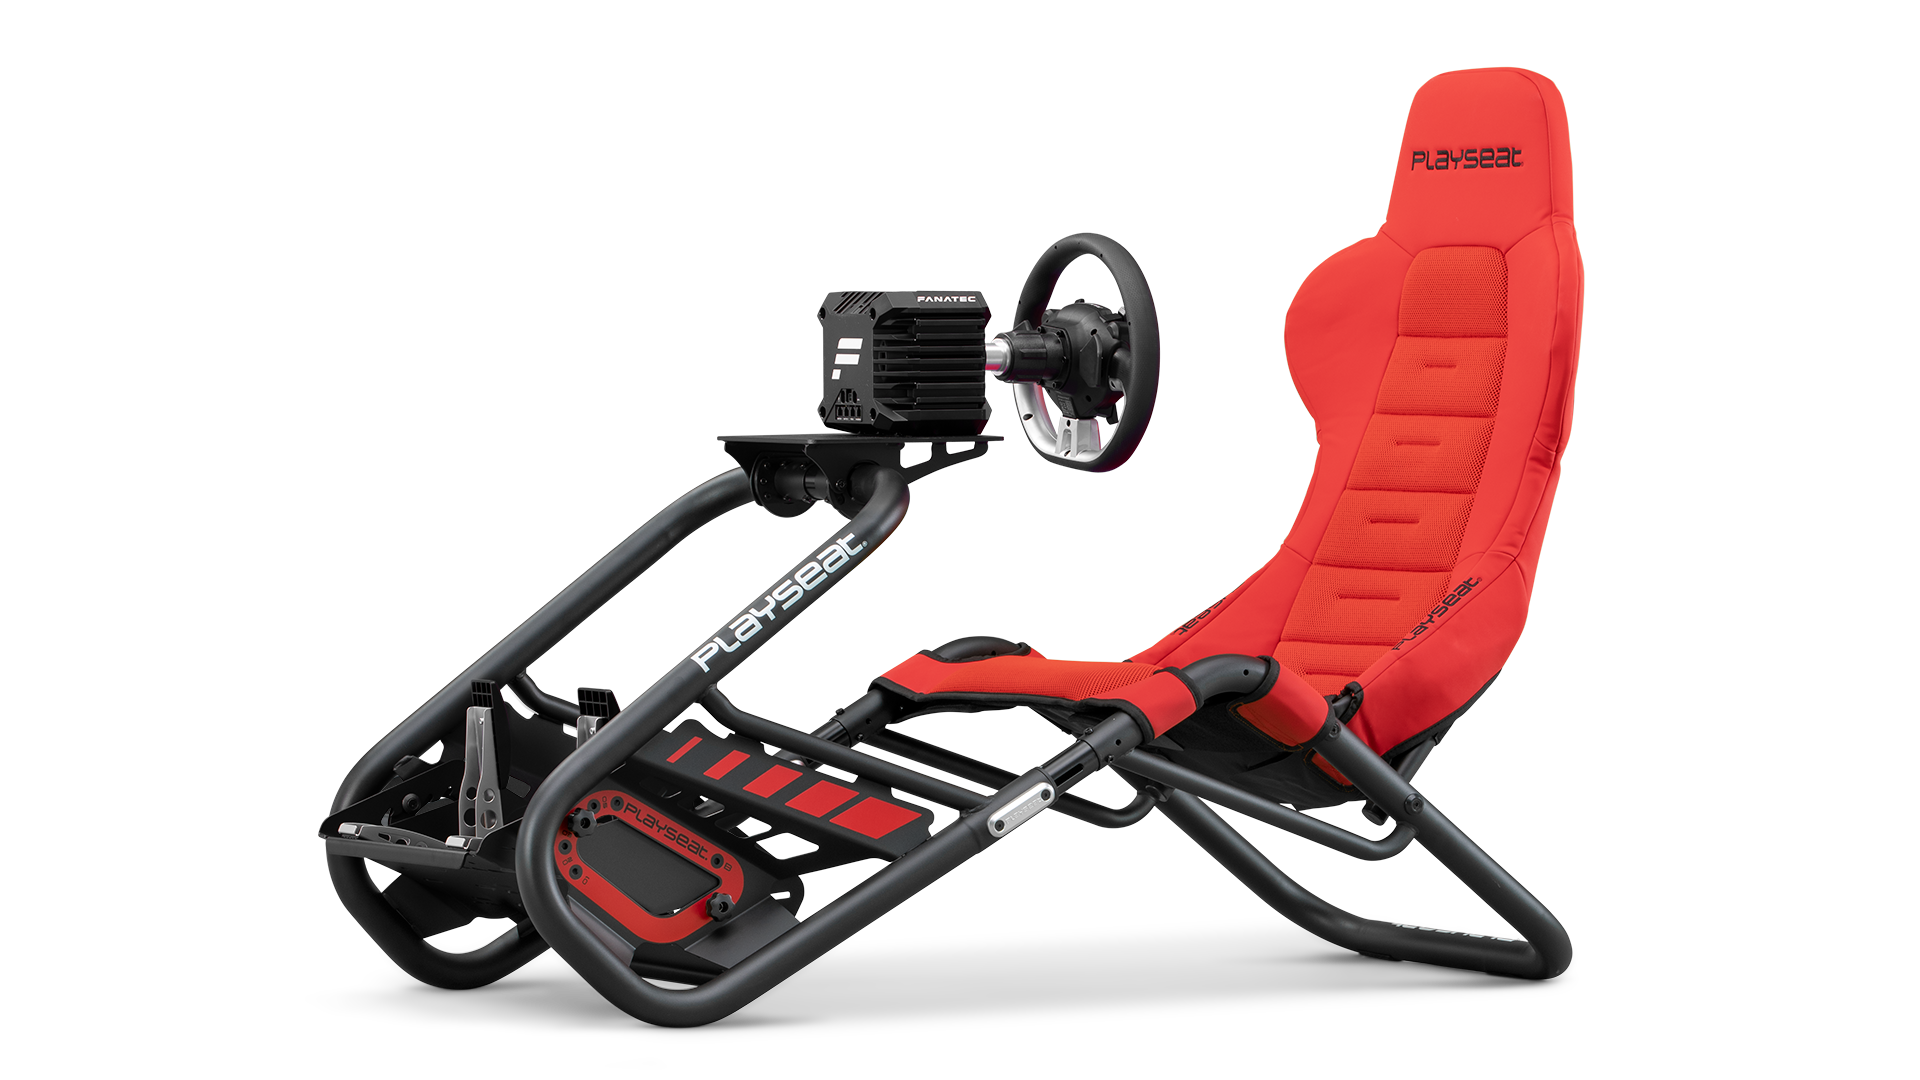 playseat-trophy-red-direct-drive-simulator-front-angle-view-fanatec-1920x1080-3.png